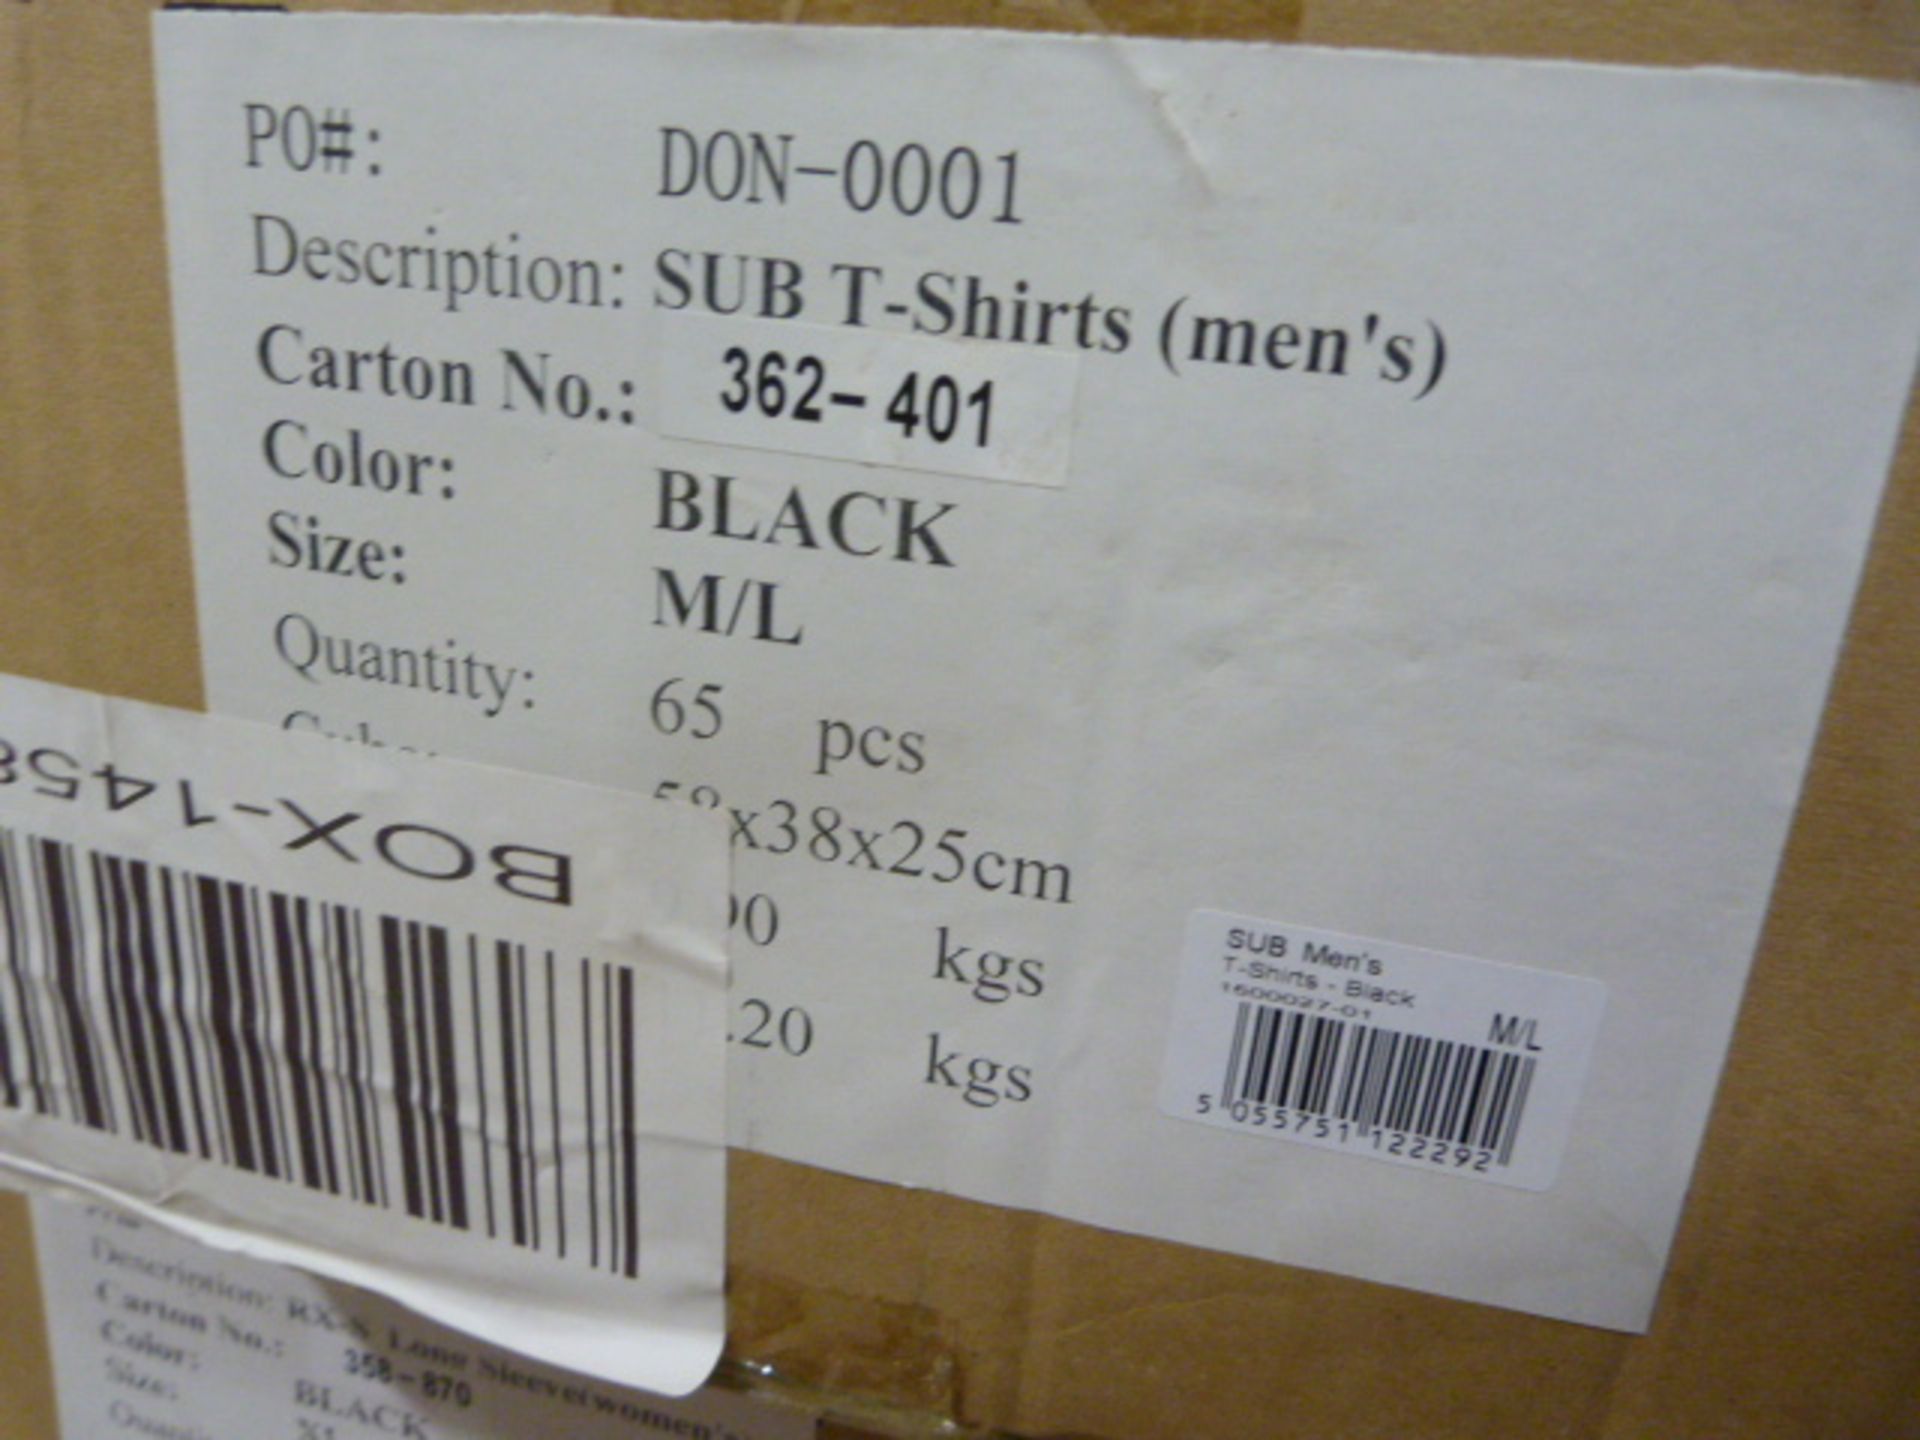 *10 Men's Sub T-Shirts in Black Size: M/L - Image 2 of 2